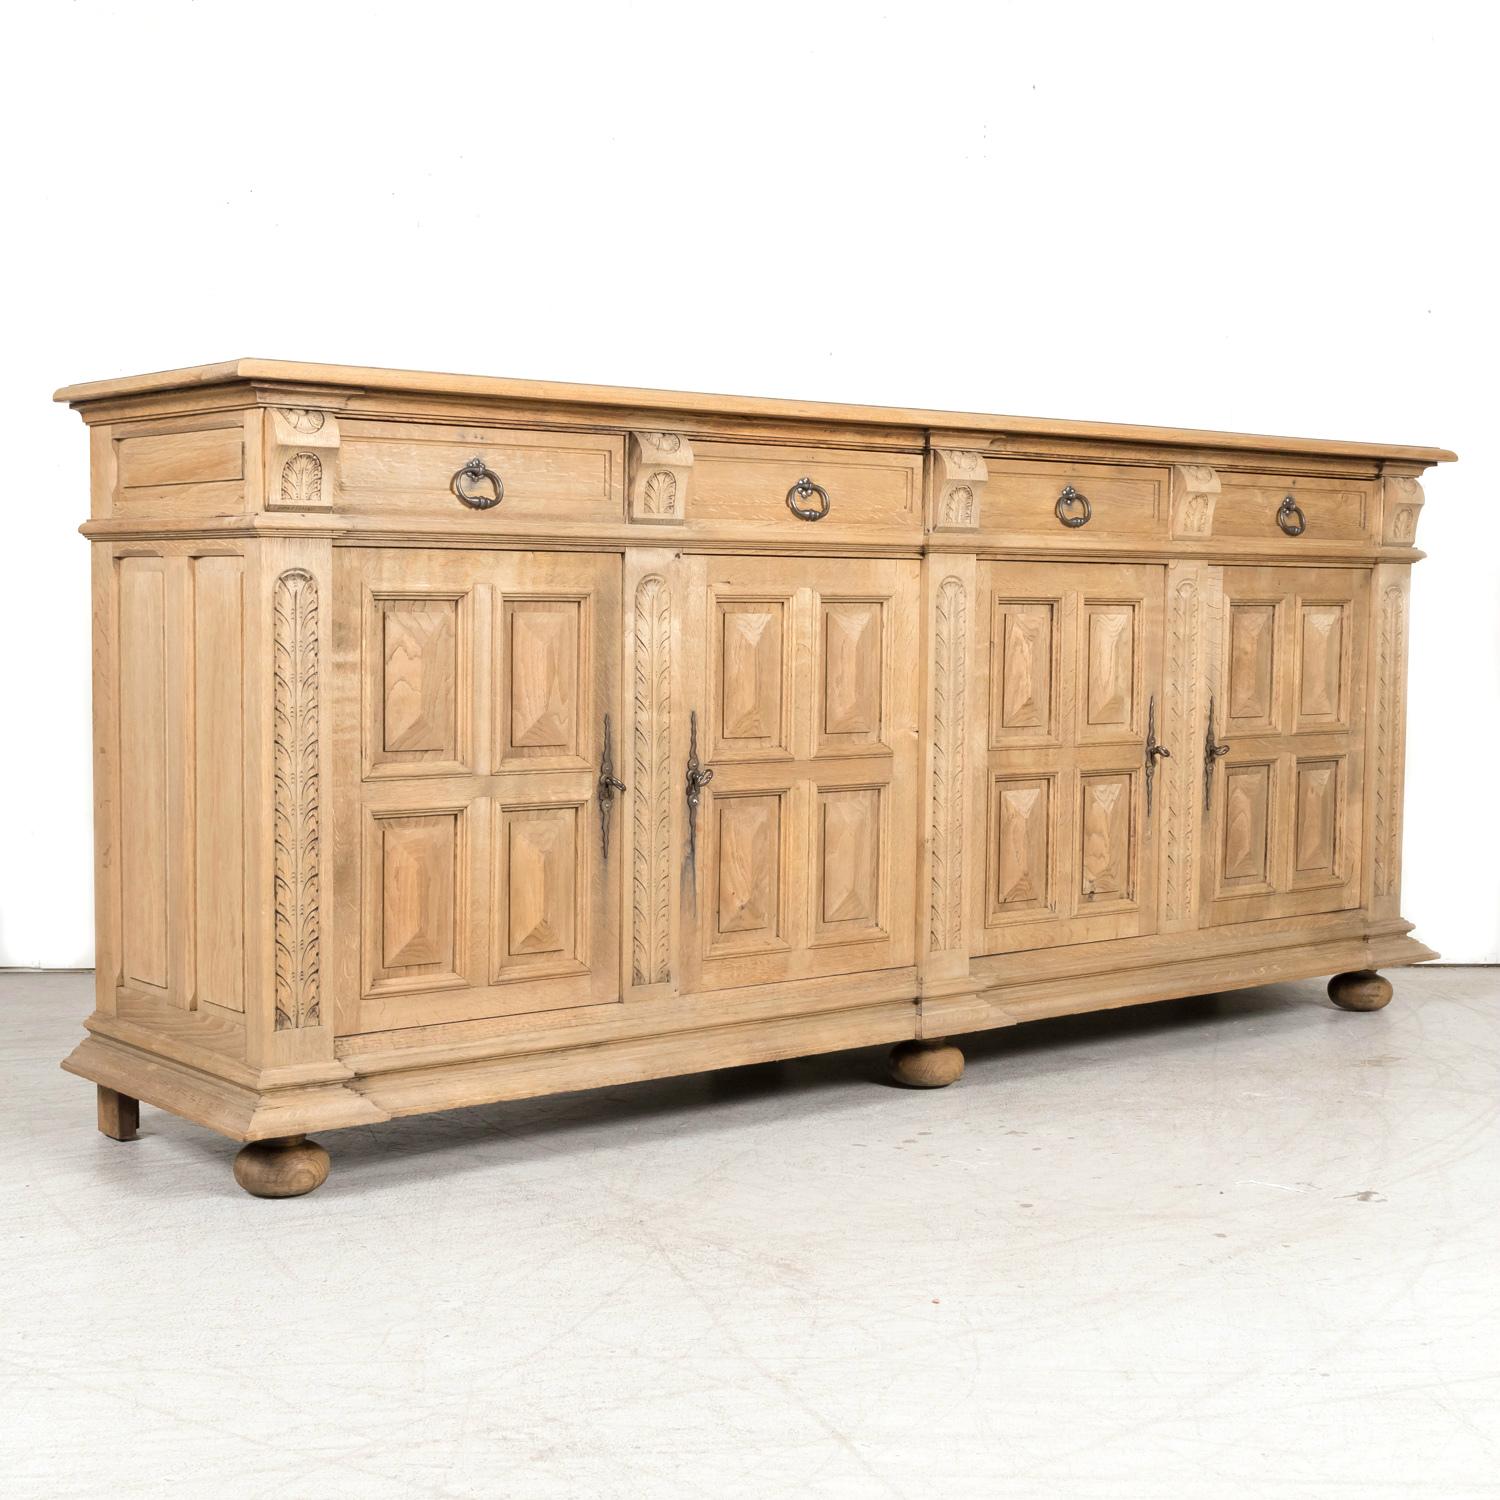 An antique French Louis XIII style carved enfilade buffet handcrafted of solid oak by talented atisans in the picturesque town of Honfleur, a commune in the Calvados department located on the Normandy coast on the southern bank of the estuary where